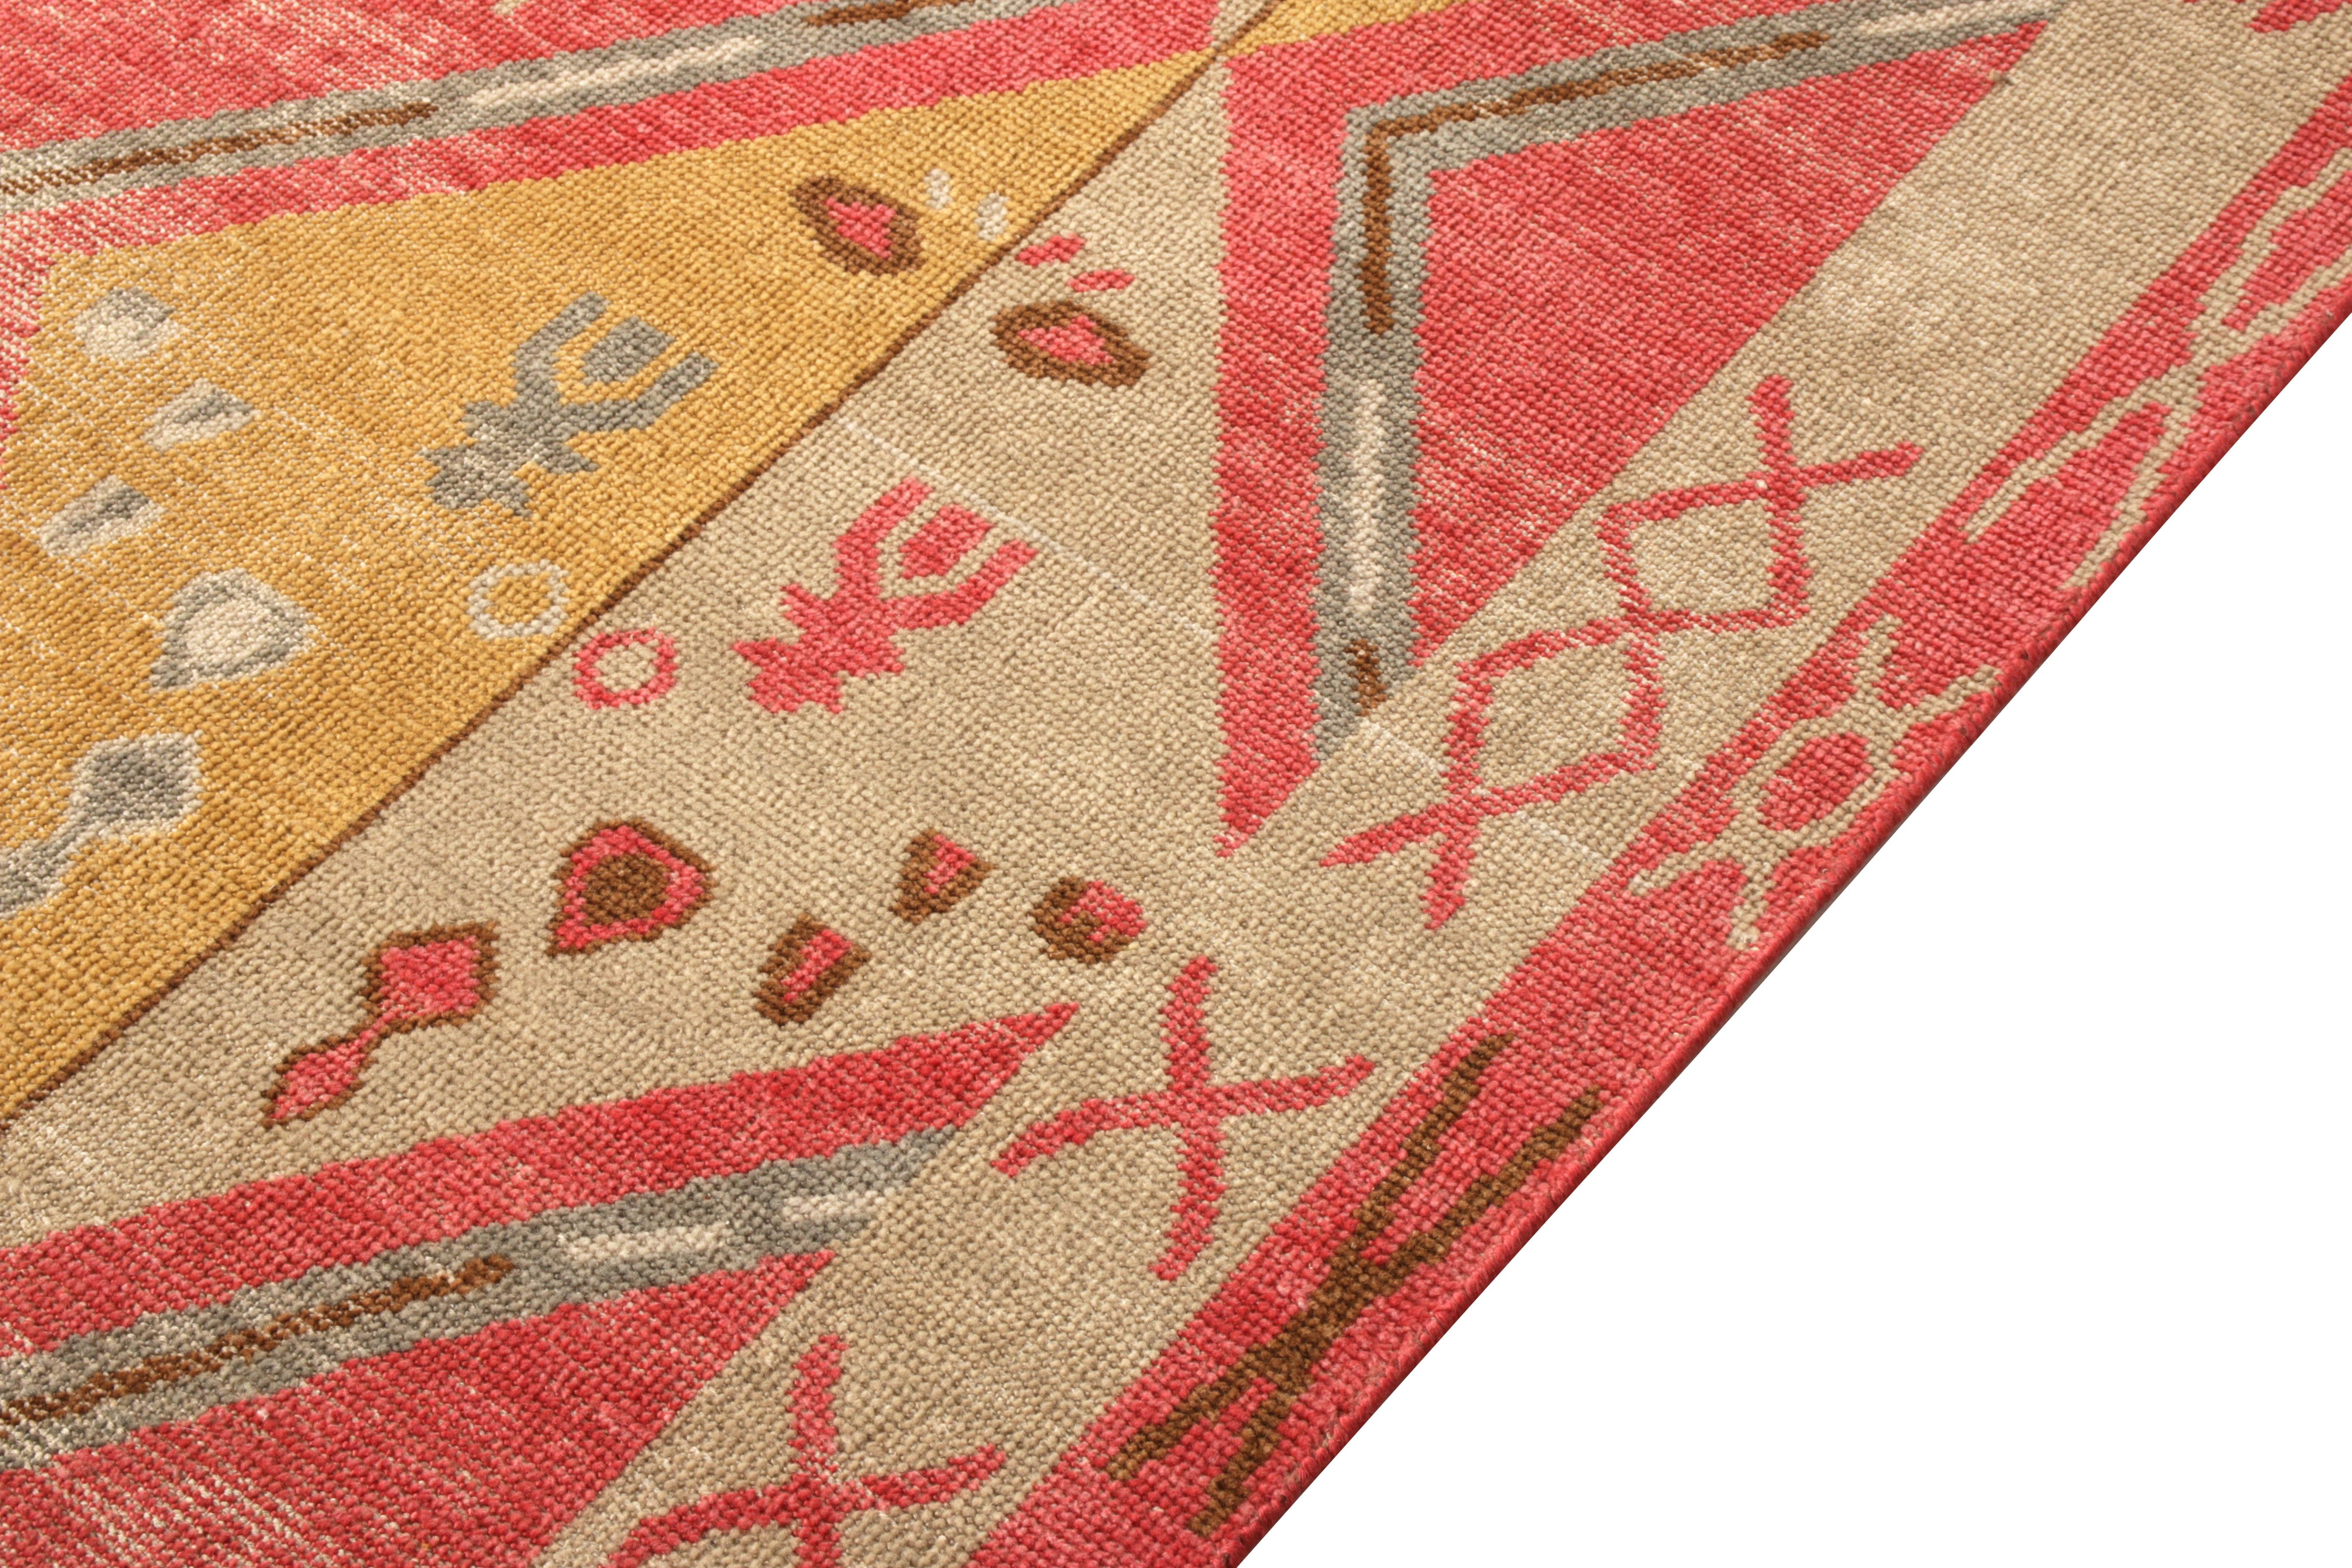 Contemporary Rug & Kilim's Hand-Knotted Tribal-Style Rug, Red and Gold Diamond Pattern For Sale